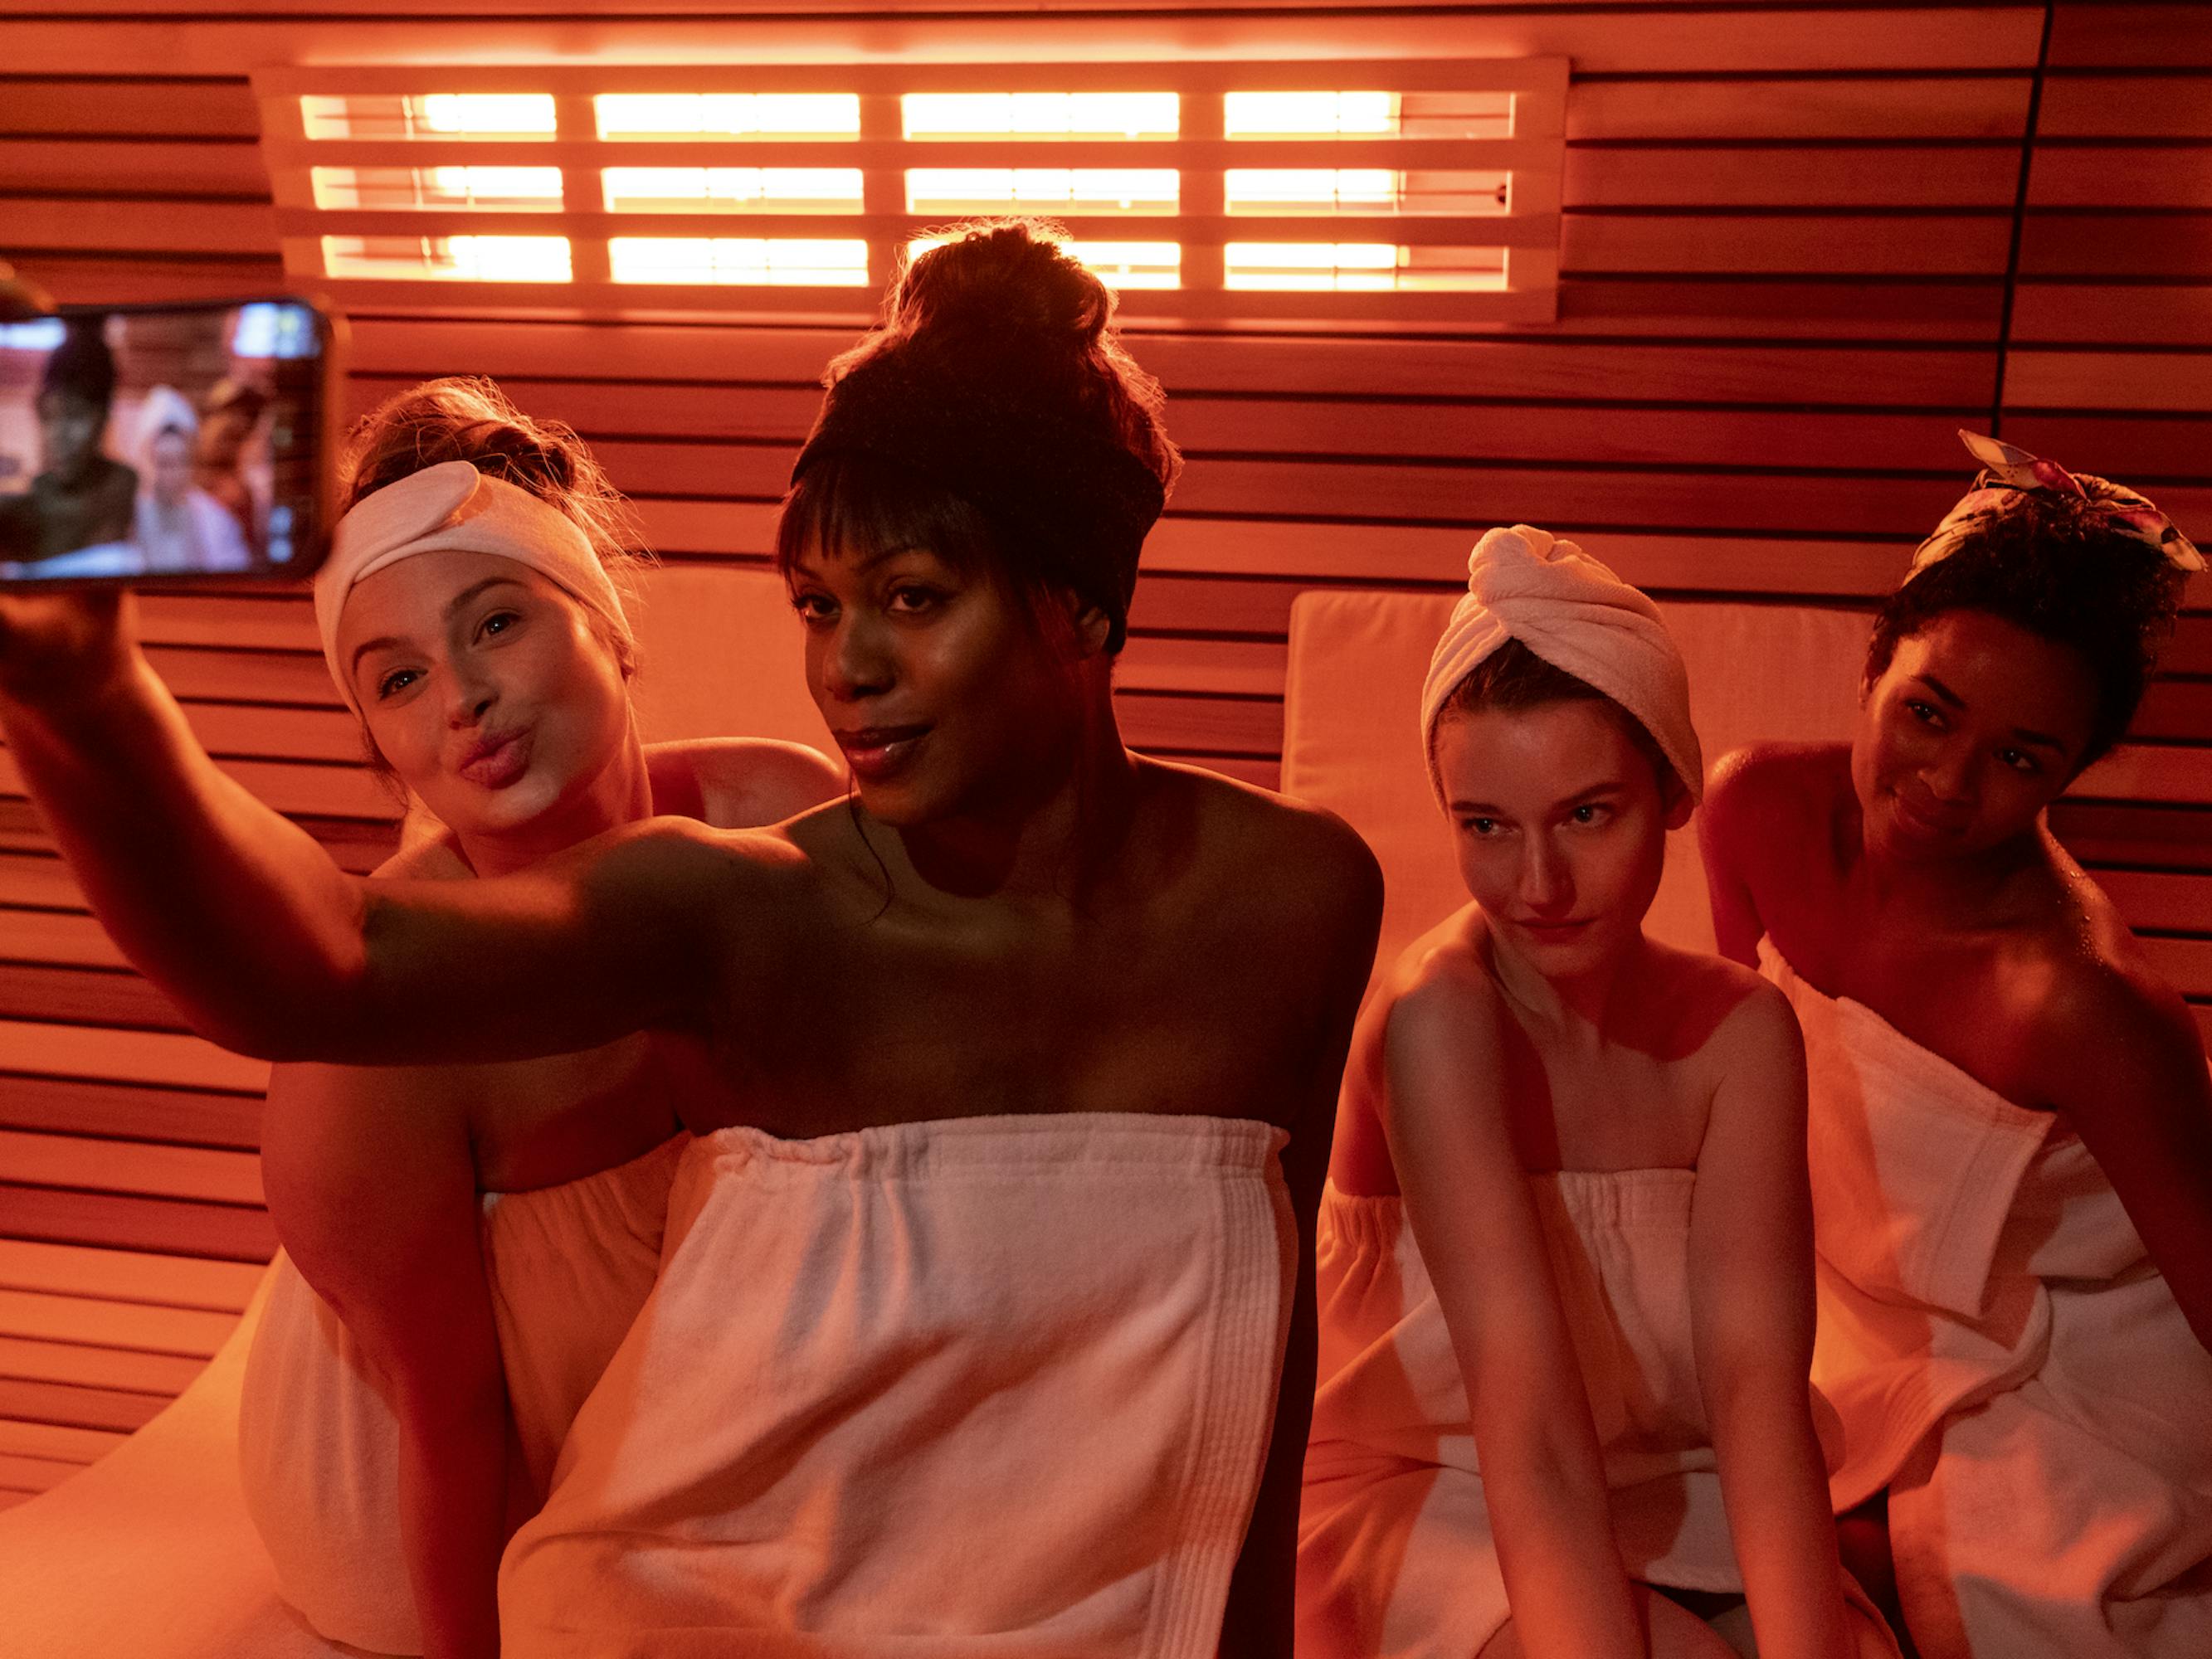 Katie Lowes, Laverne Cox, Julia Garner, and Alexis Floyd in an infrared sauna pose for a selfie.